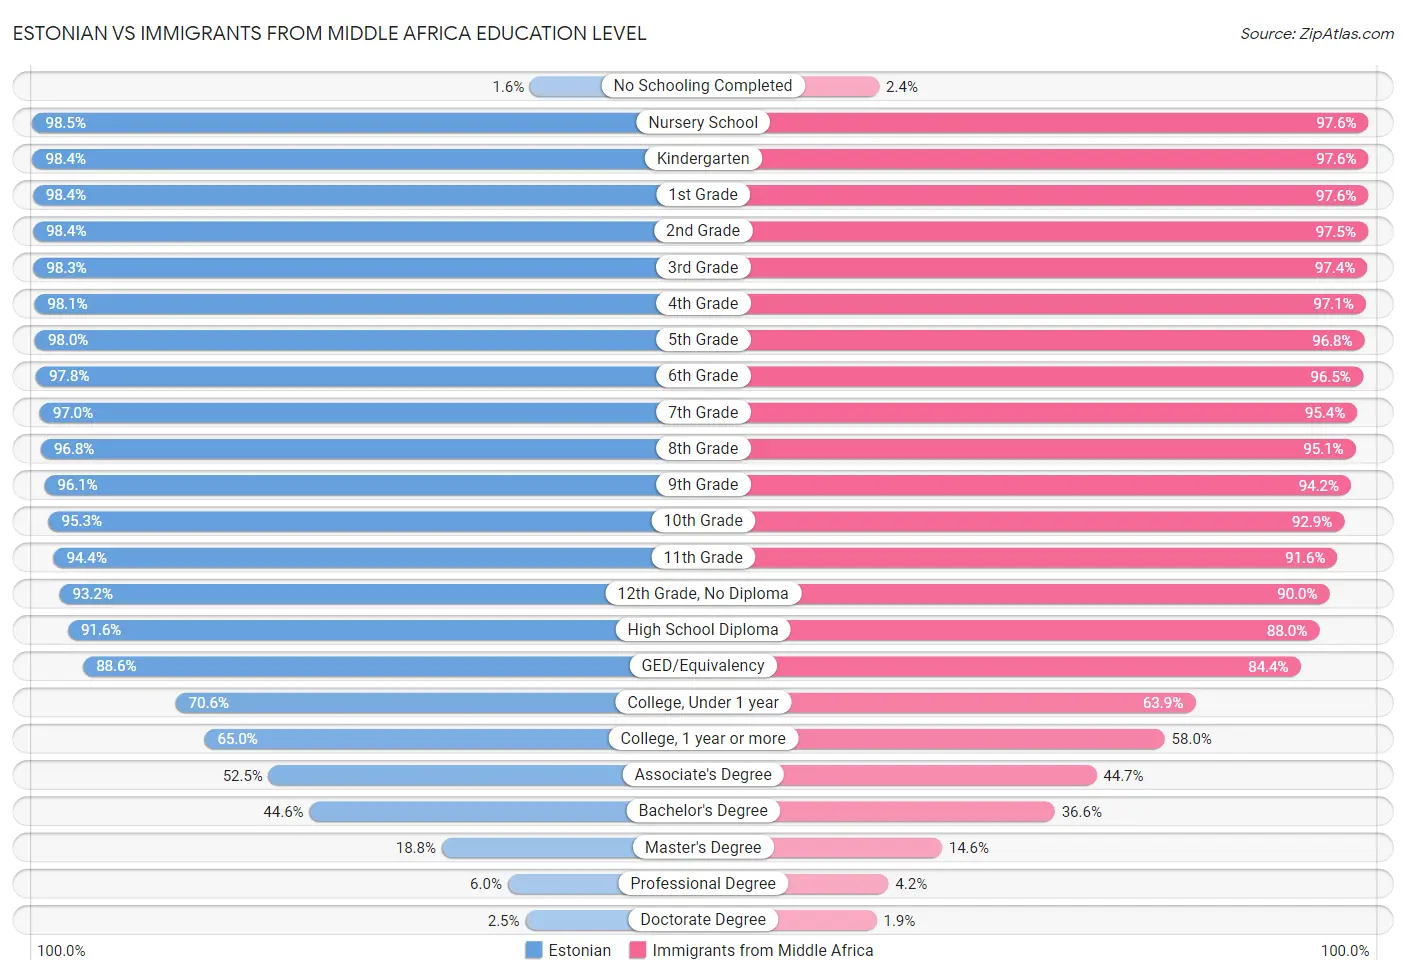 Estonian vs Immigrants from Middle Africa Education Level